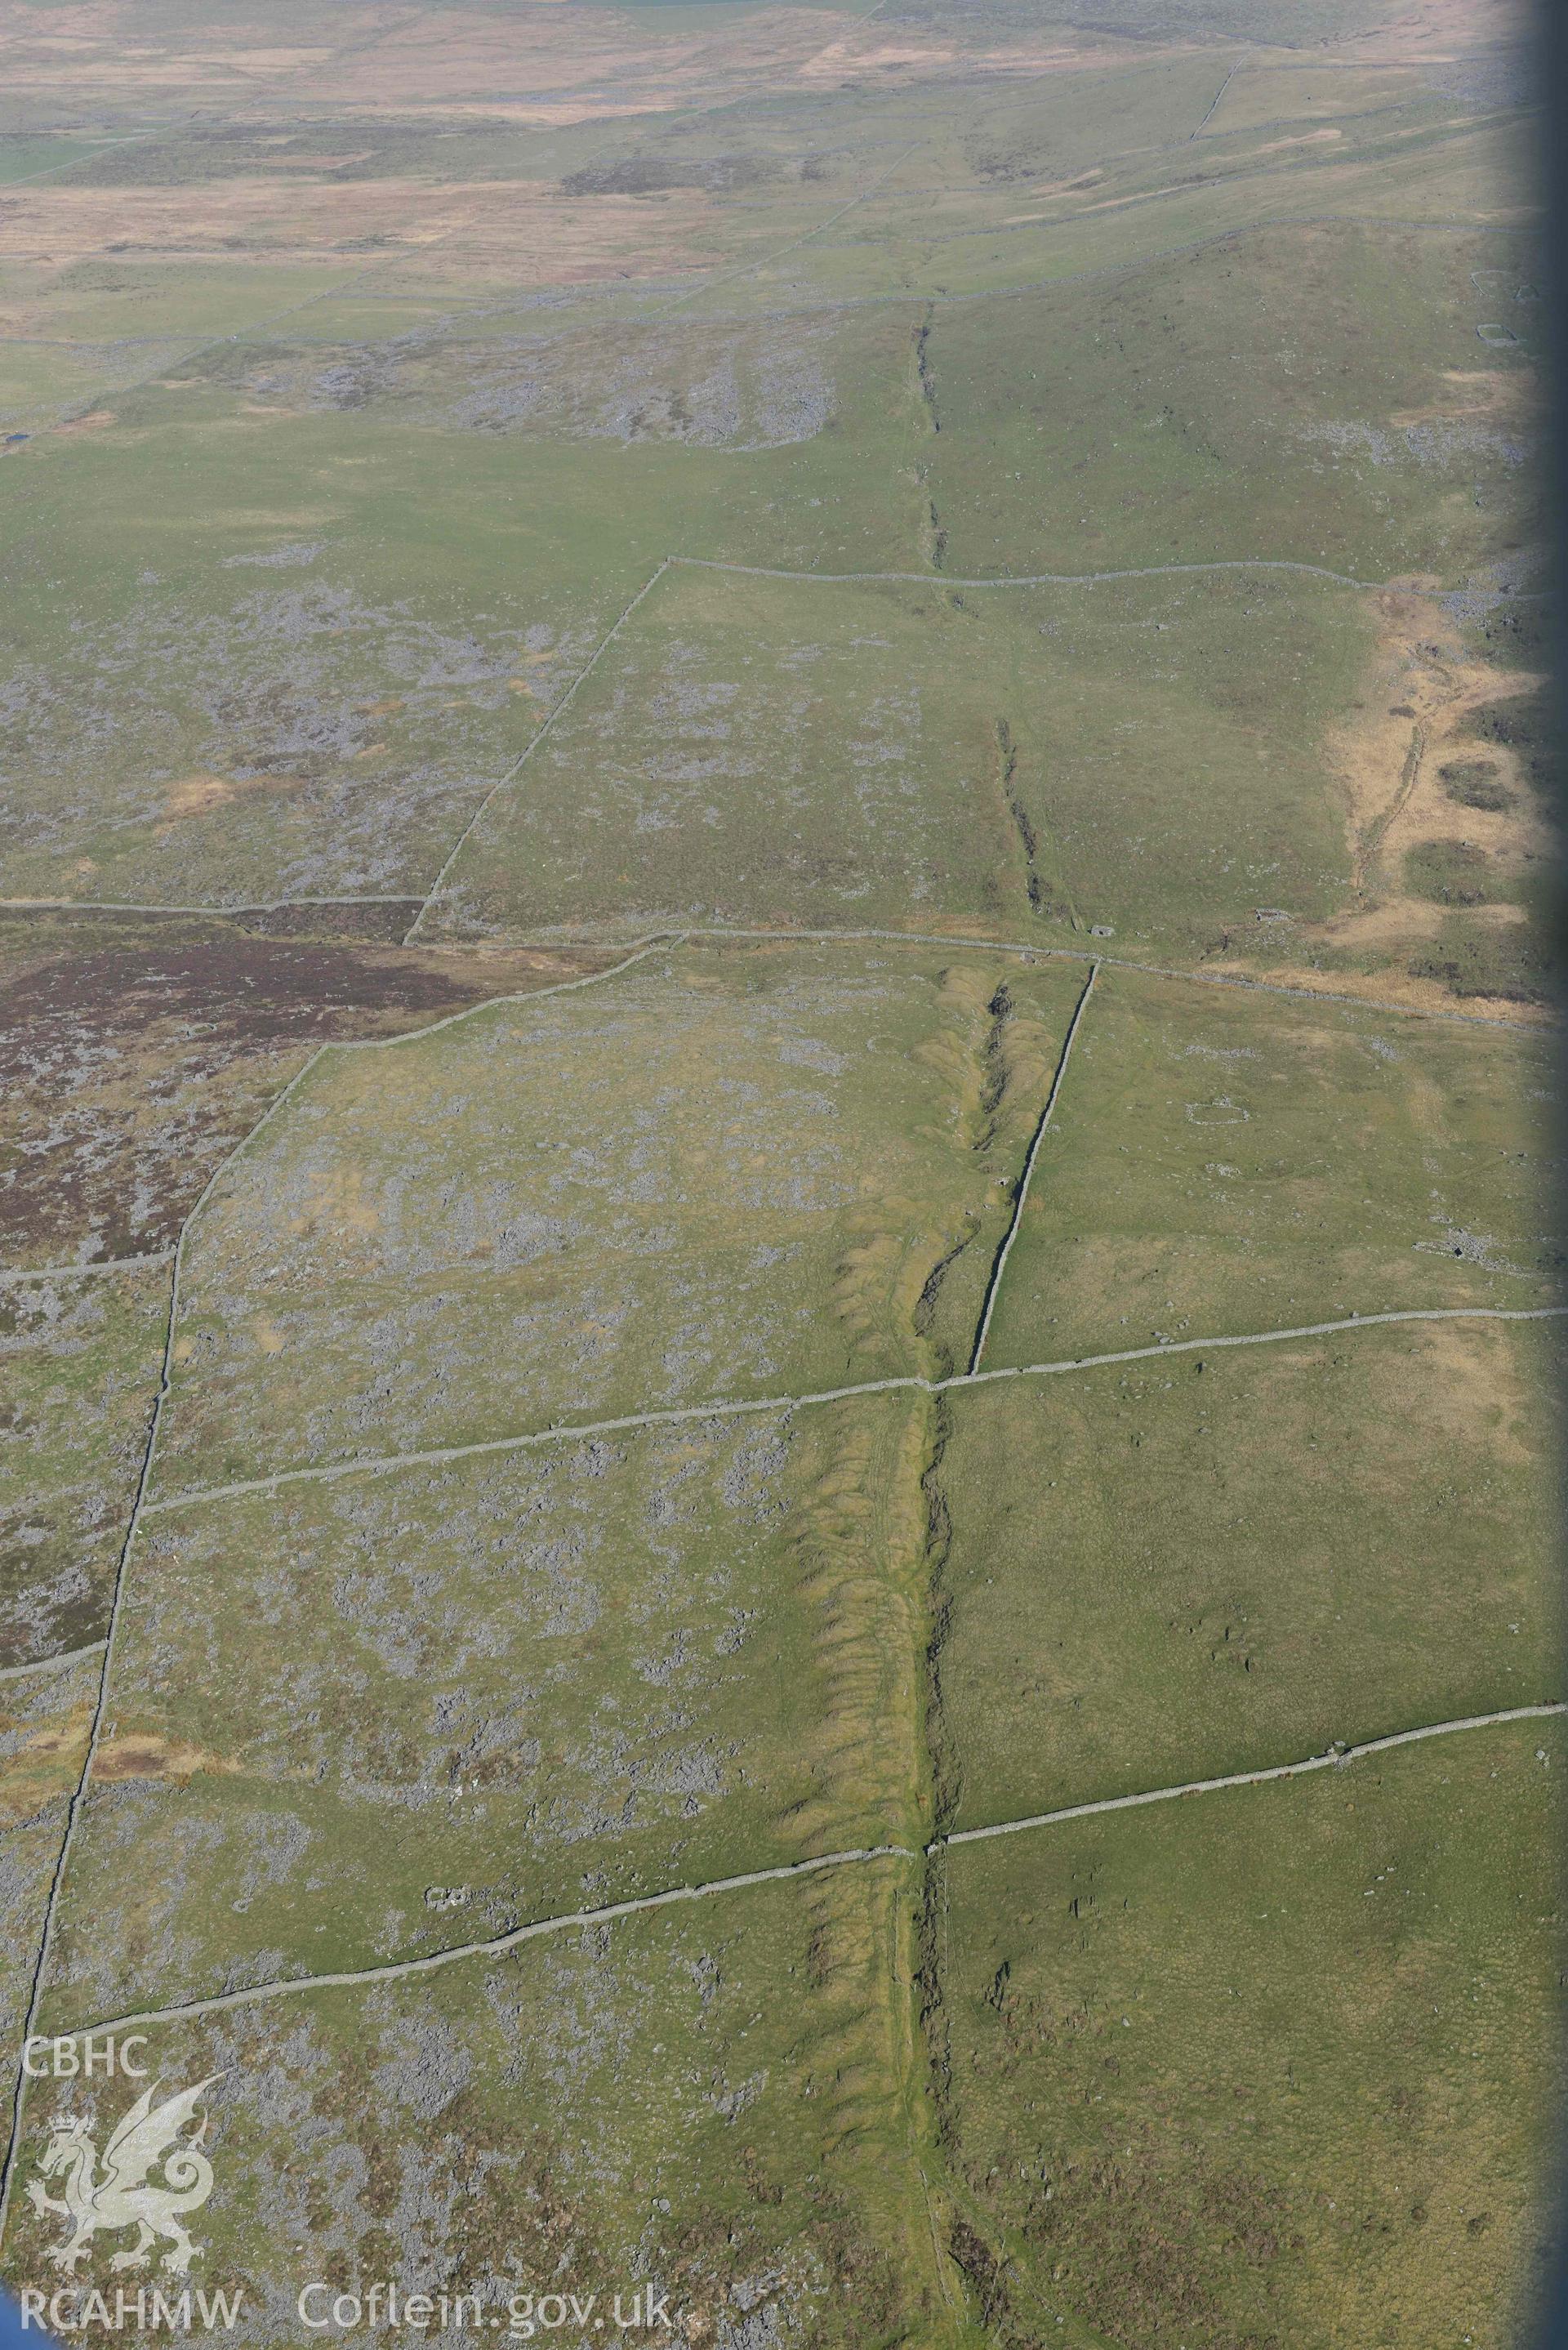 Ergyn and Hafotty manganese mines, view from the south. Oblique aerial photograph taken during the Royal Commission’s programme of archaeological aerial reconnaissance by Toby Driver on 25 March 2022.